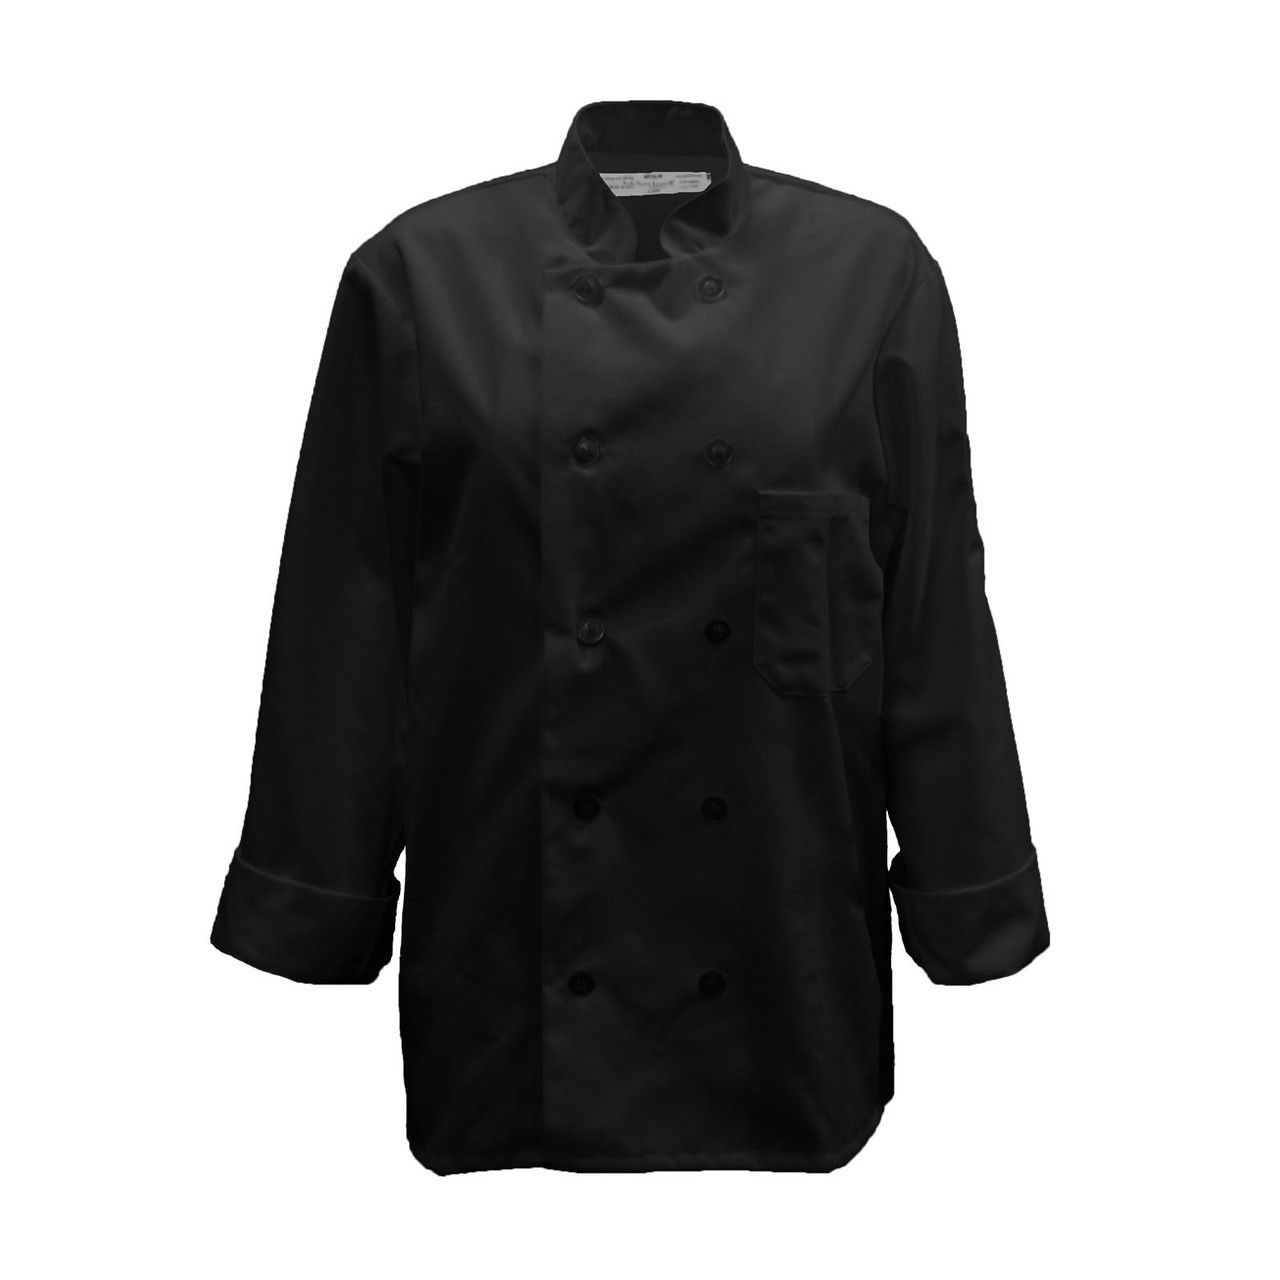 C390 Pinnacle Black Chef Coat Questions & Answers